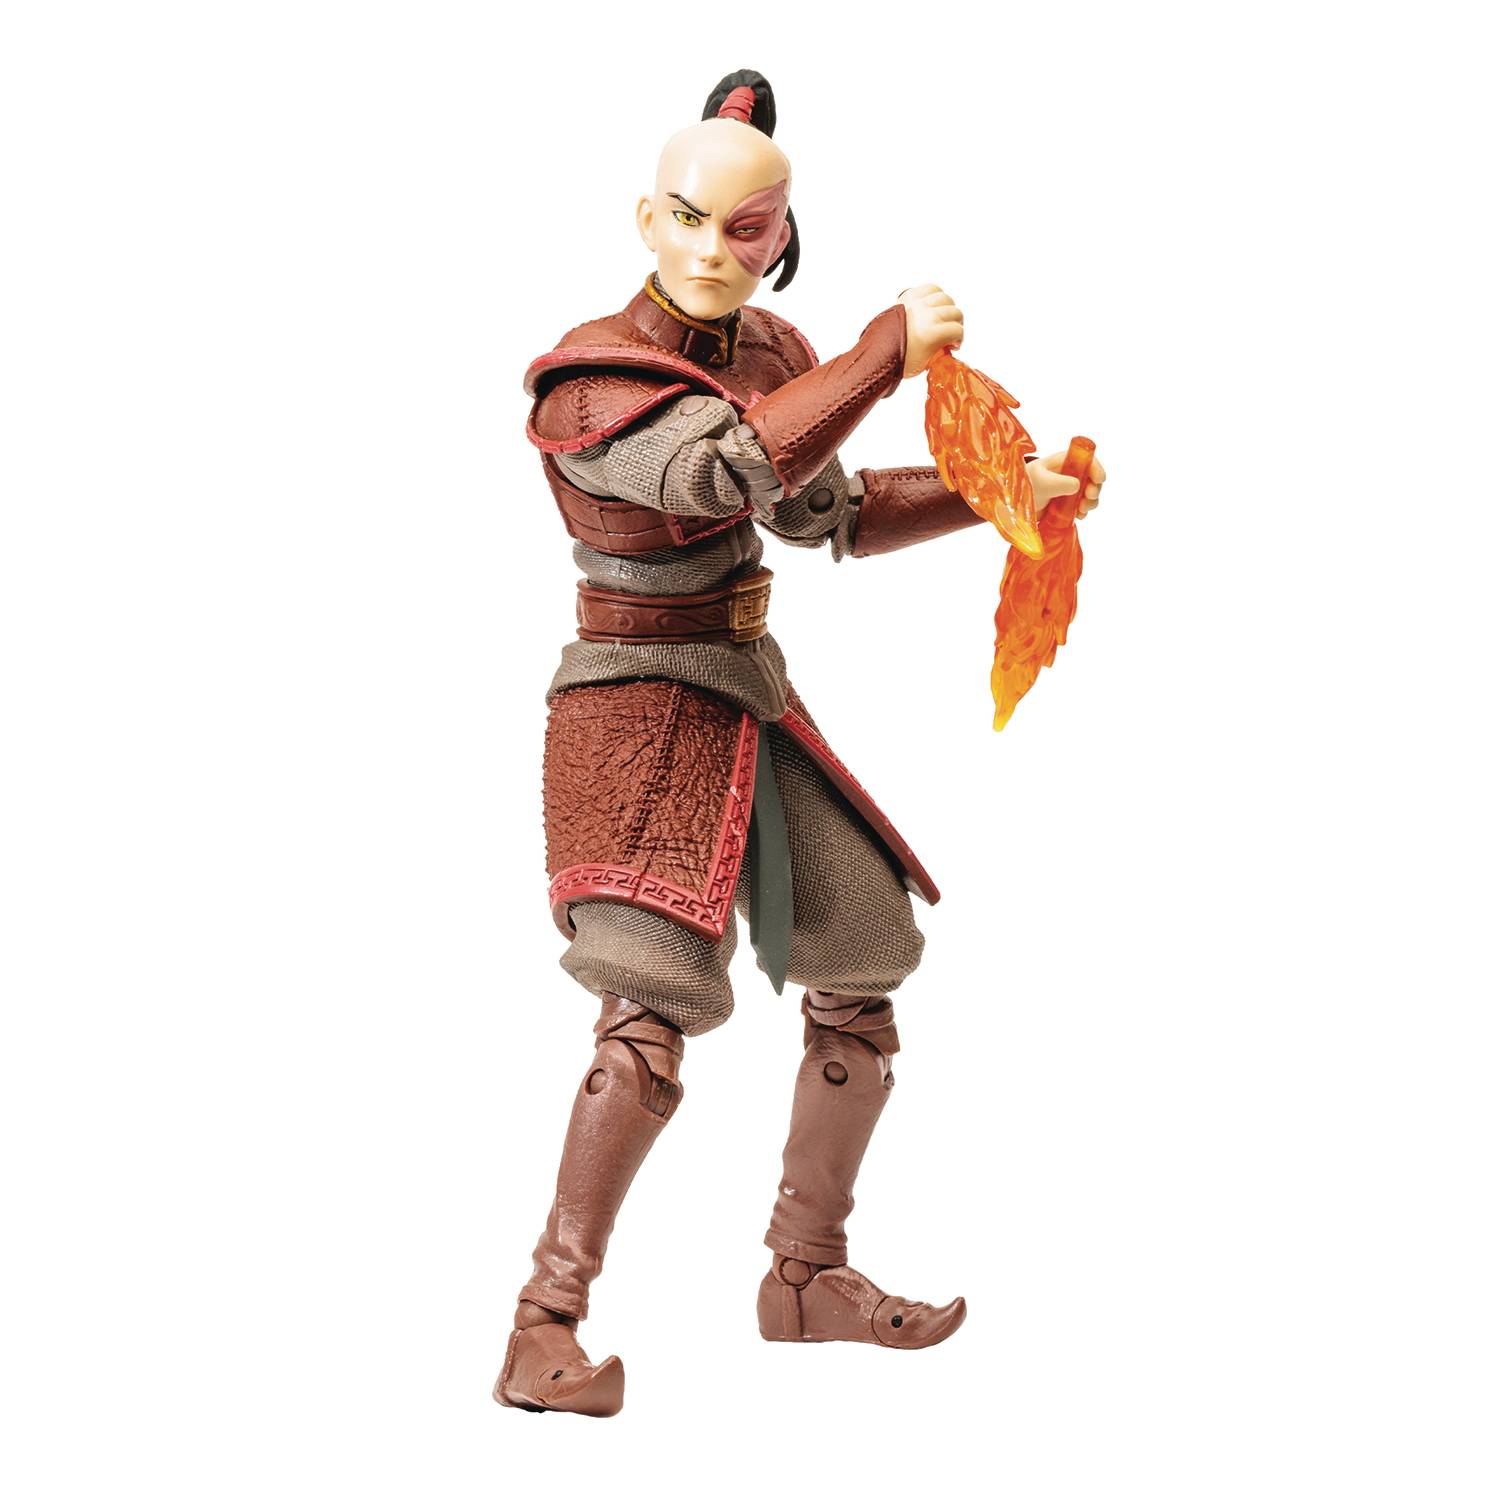 Avatar The Last Air Bender Wave Book 1 Fire Prince Zuko 7 Inch Action Figure Case